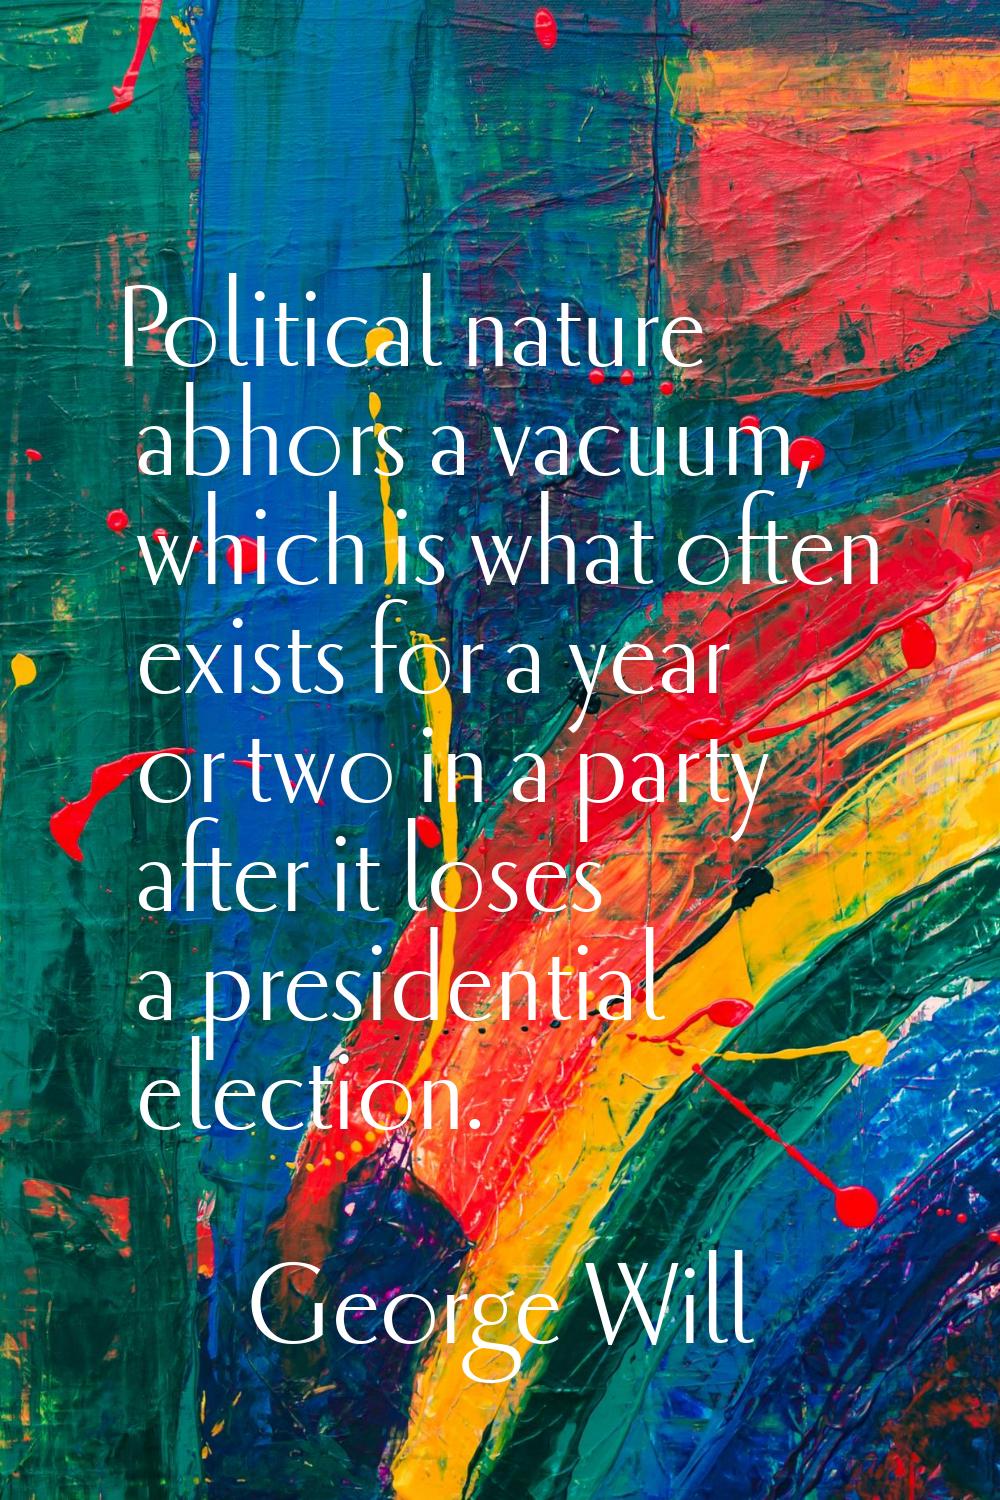 Political nature abhors a vacuum, which is what often exists for a year or two in a party after it 